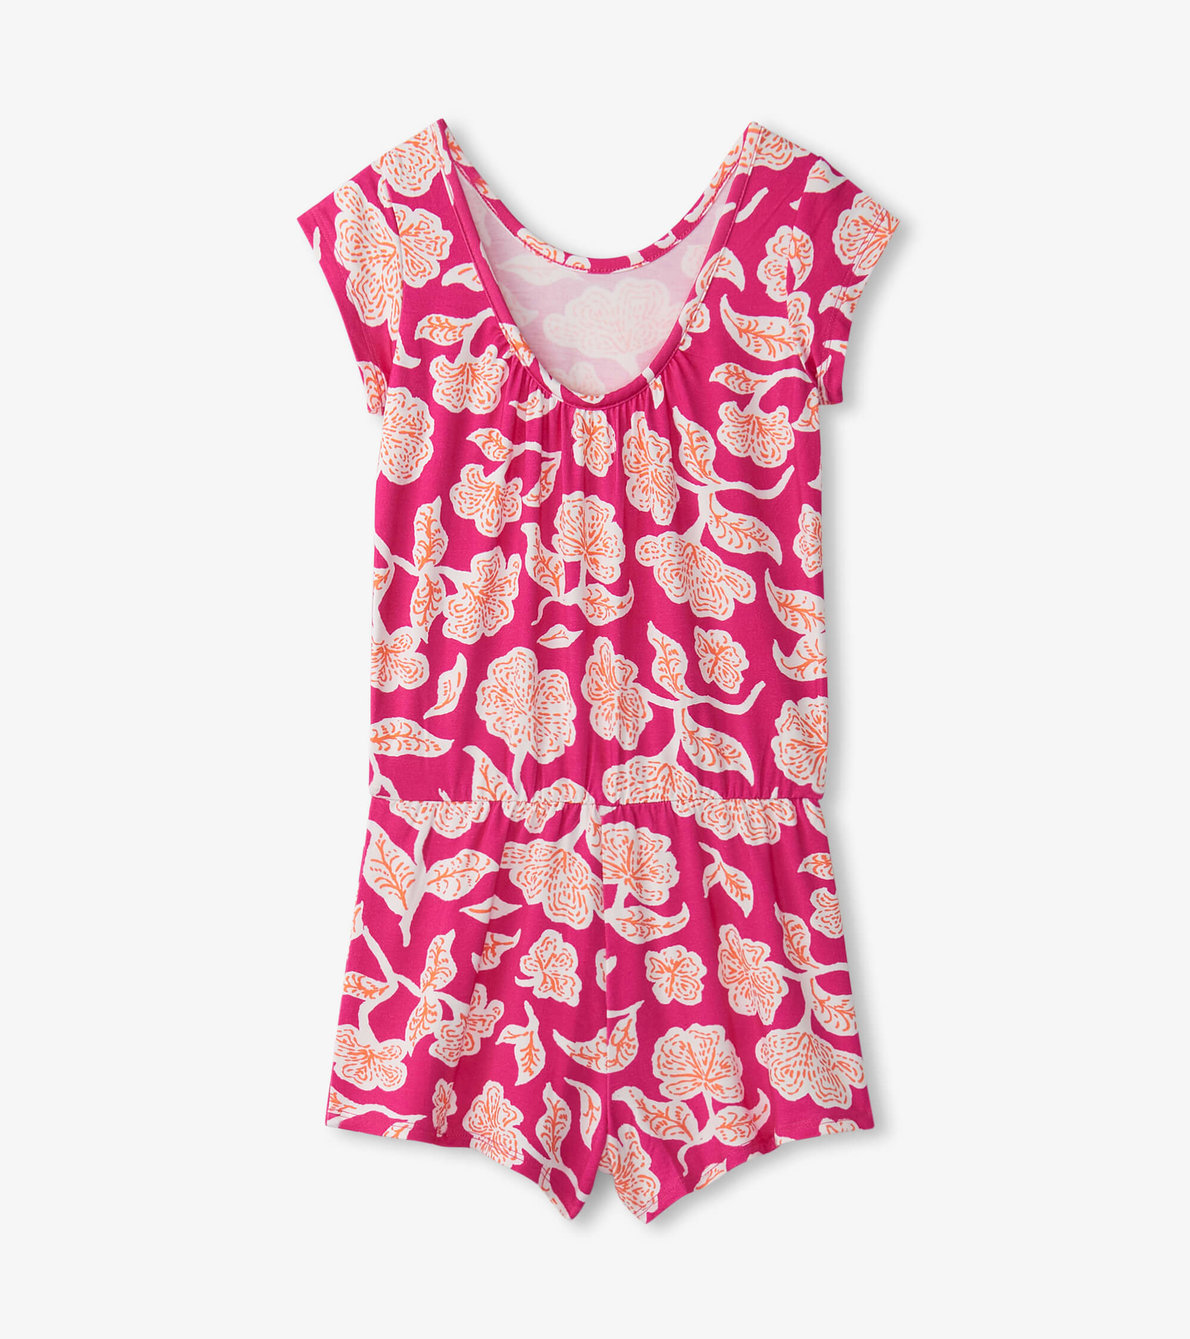 View larger image of Girls Floral Romper